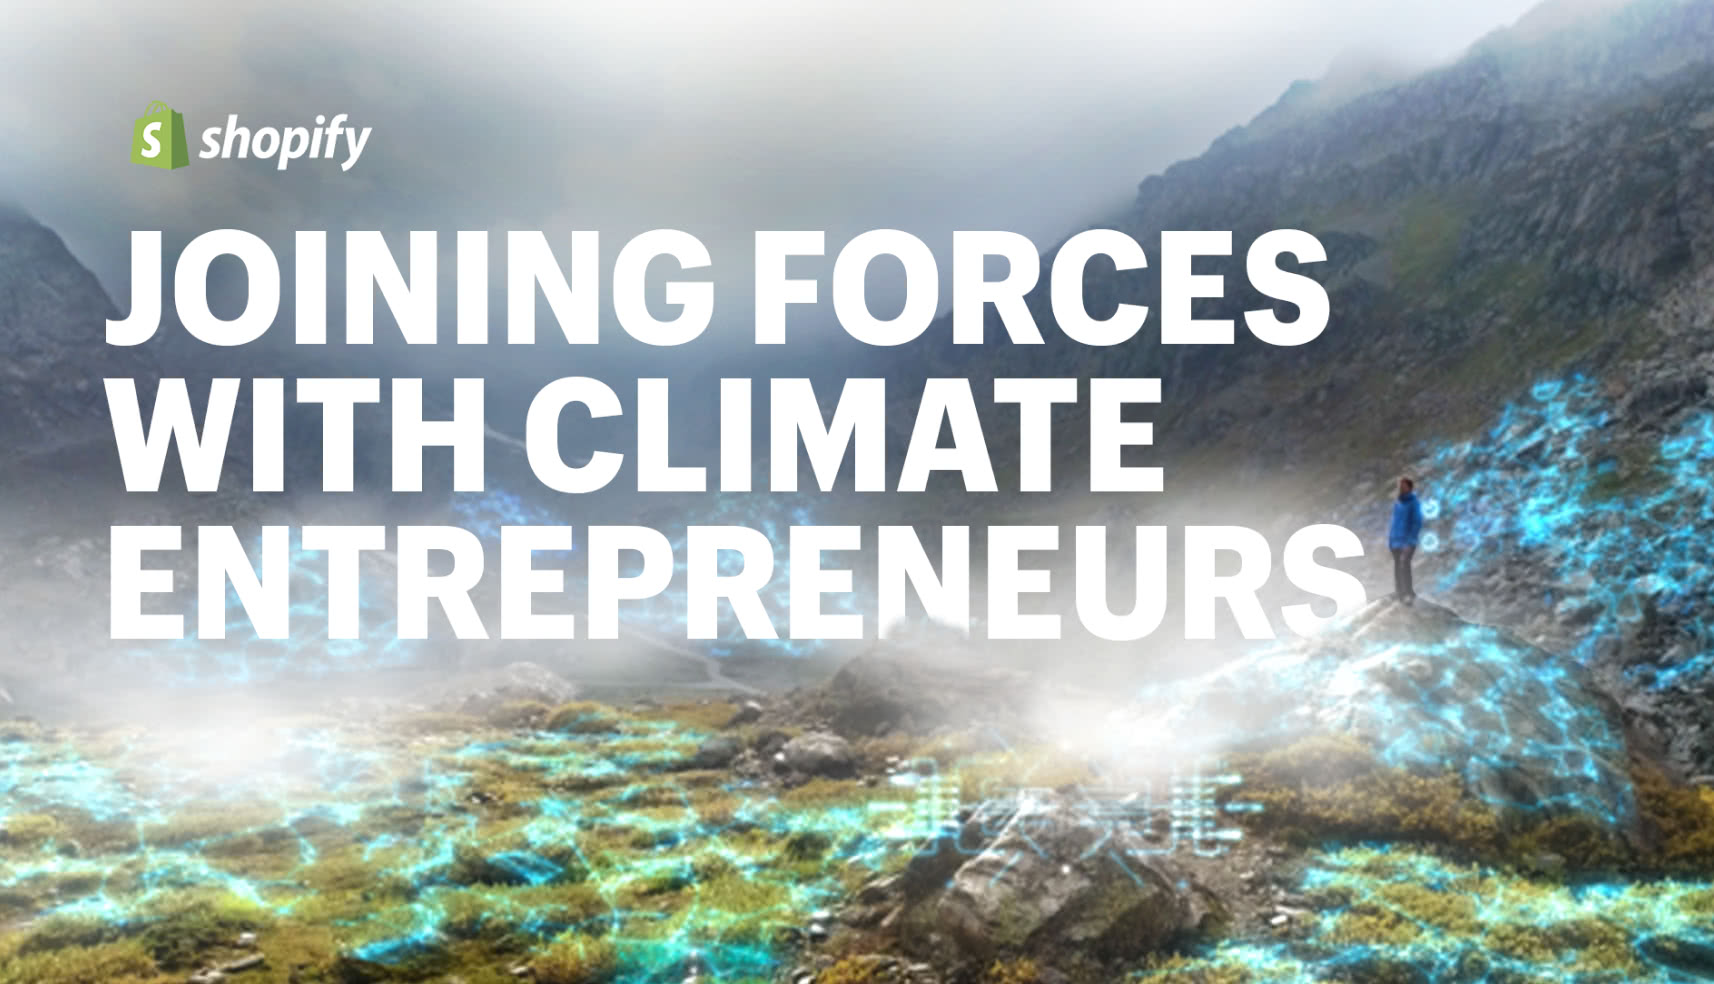 Title card with the message "Joining forces with climate entrepreneurs" overlaid on a scenic nature image